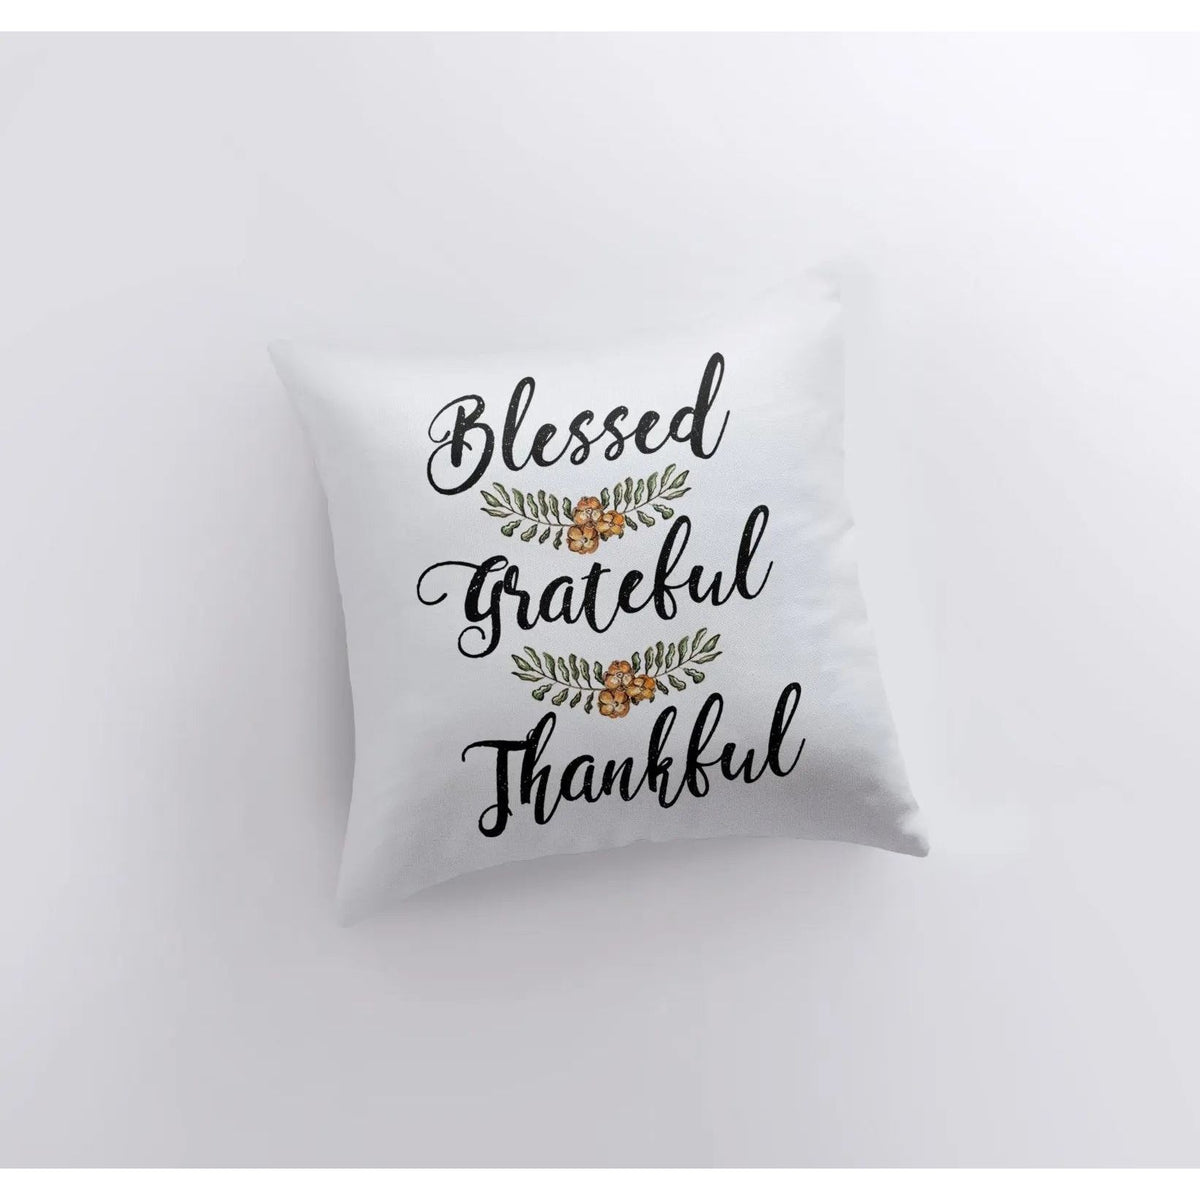 Blessed Grateful Thankful | Pillow Cover | Fall Decor | Fall Decoration | Thanksgiving Decor